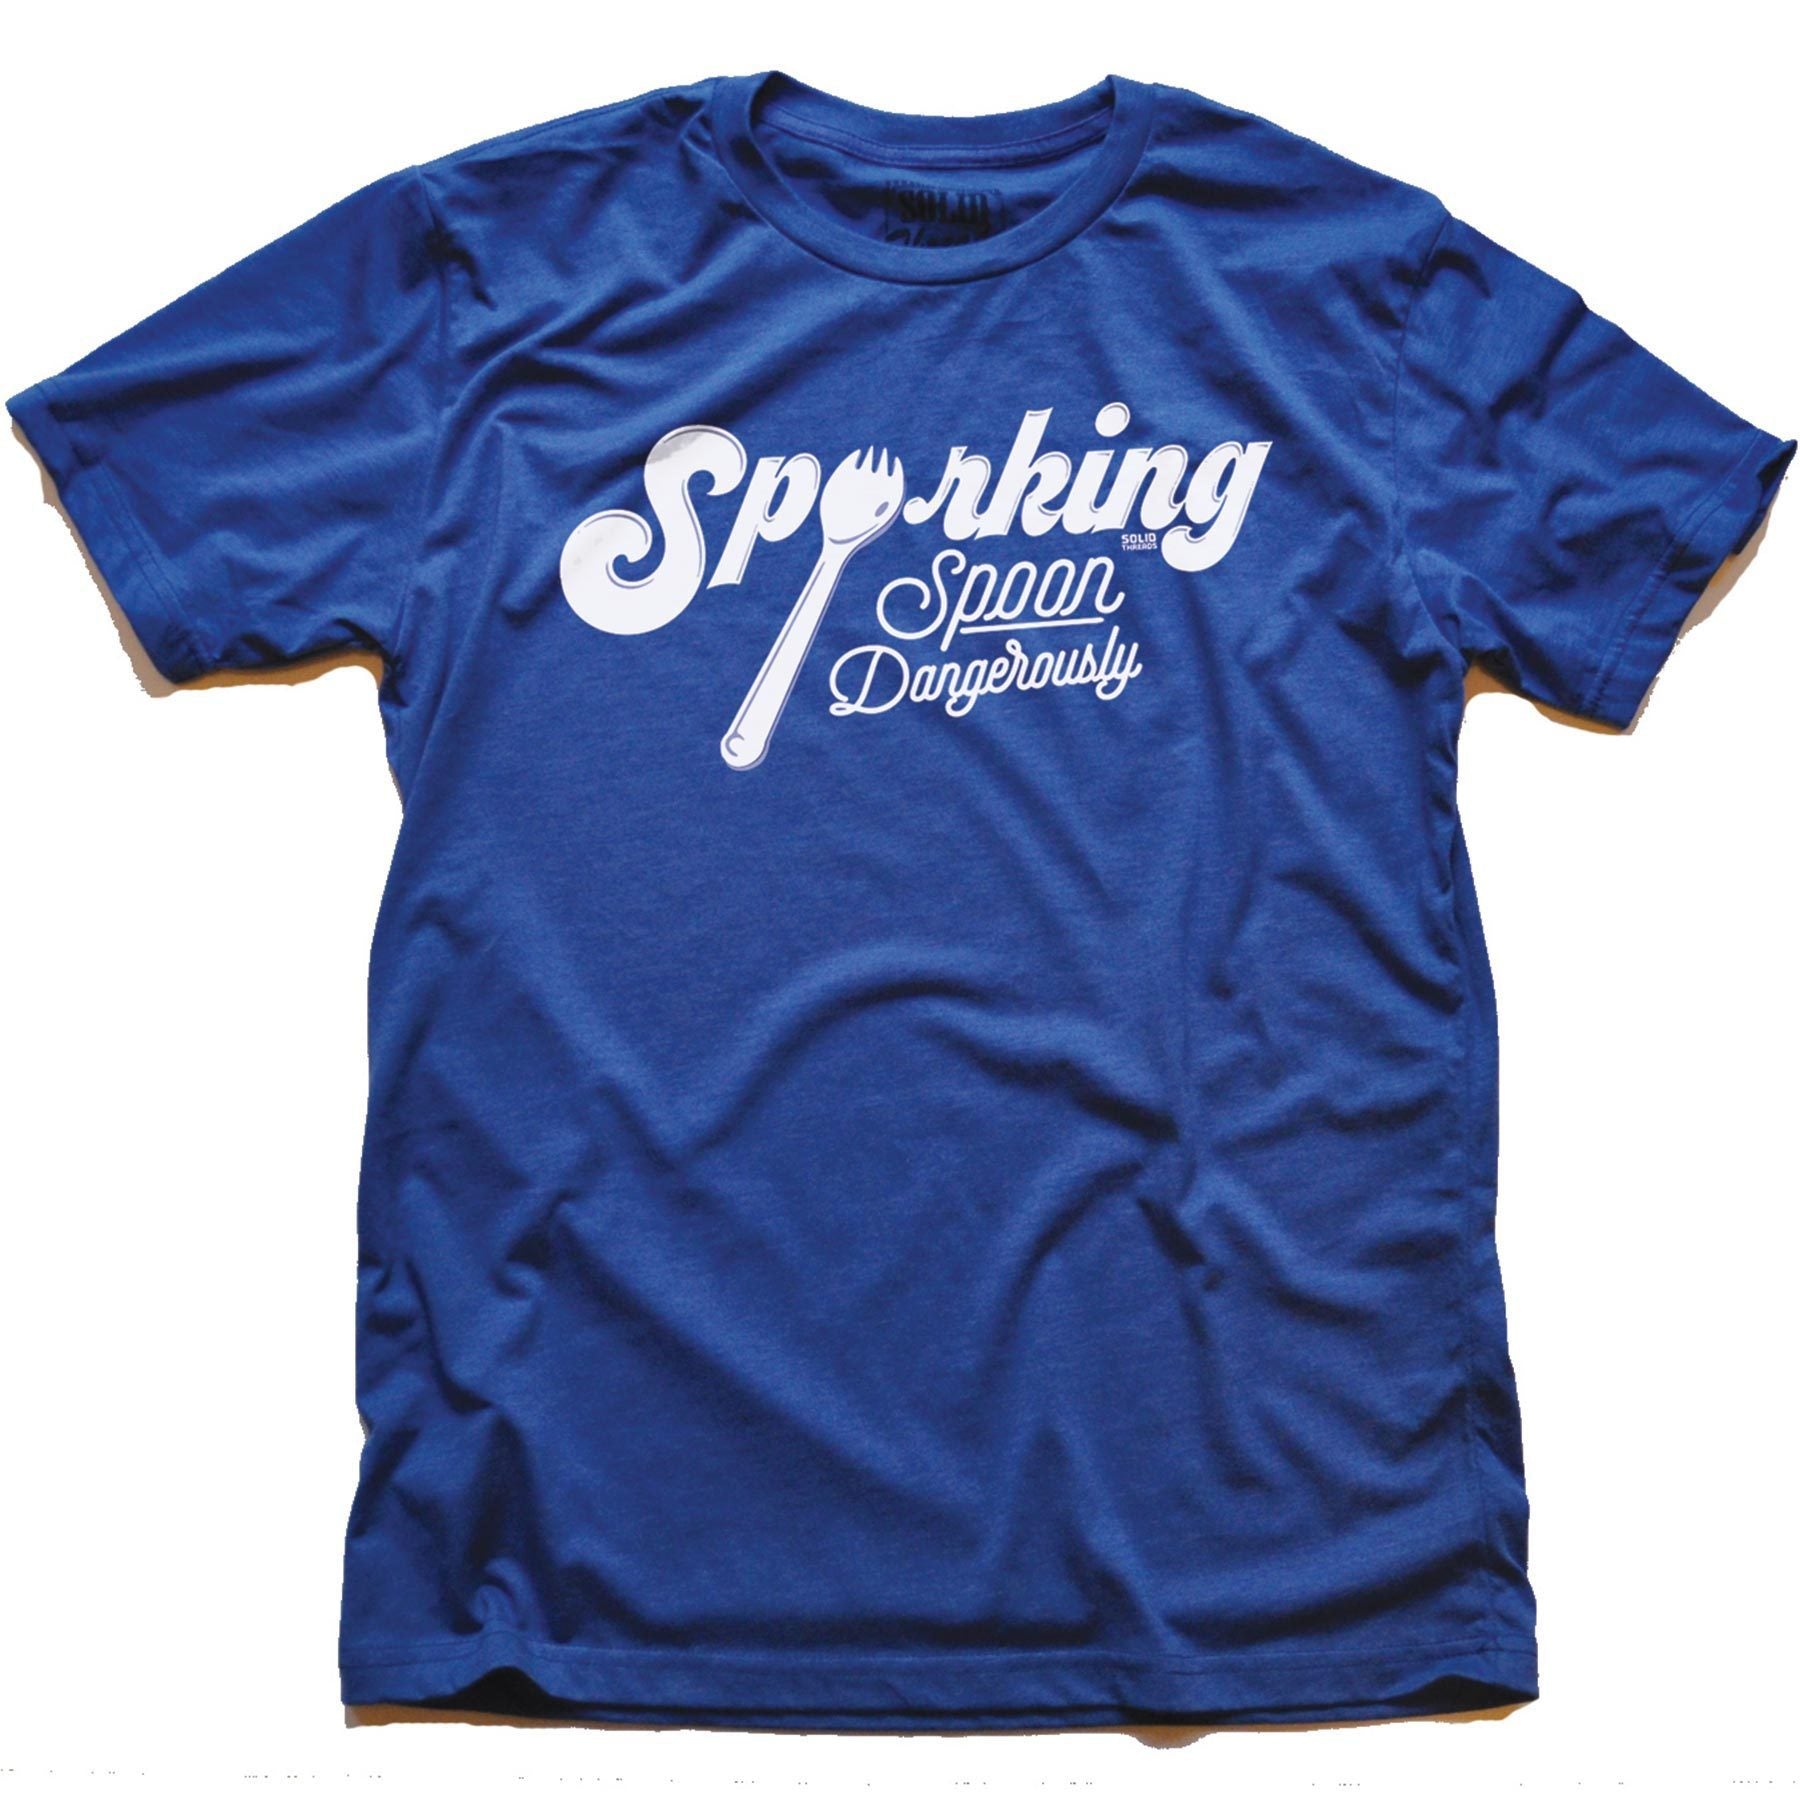 Sporking, Spoon Dangerously Vintage T-shirt | SOLID THREADS